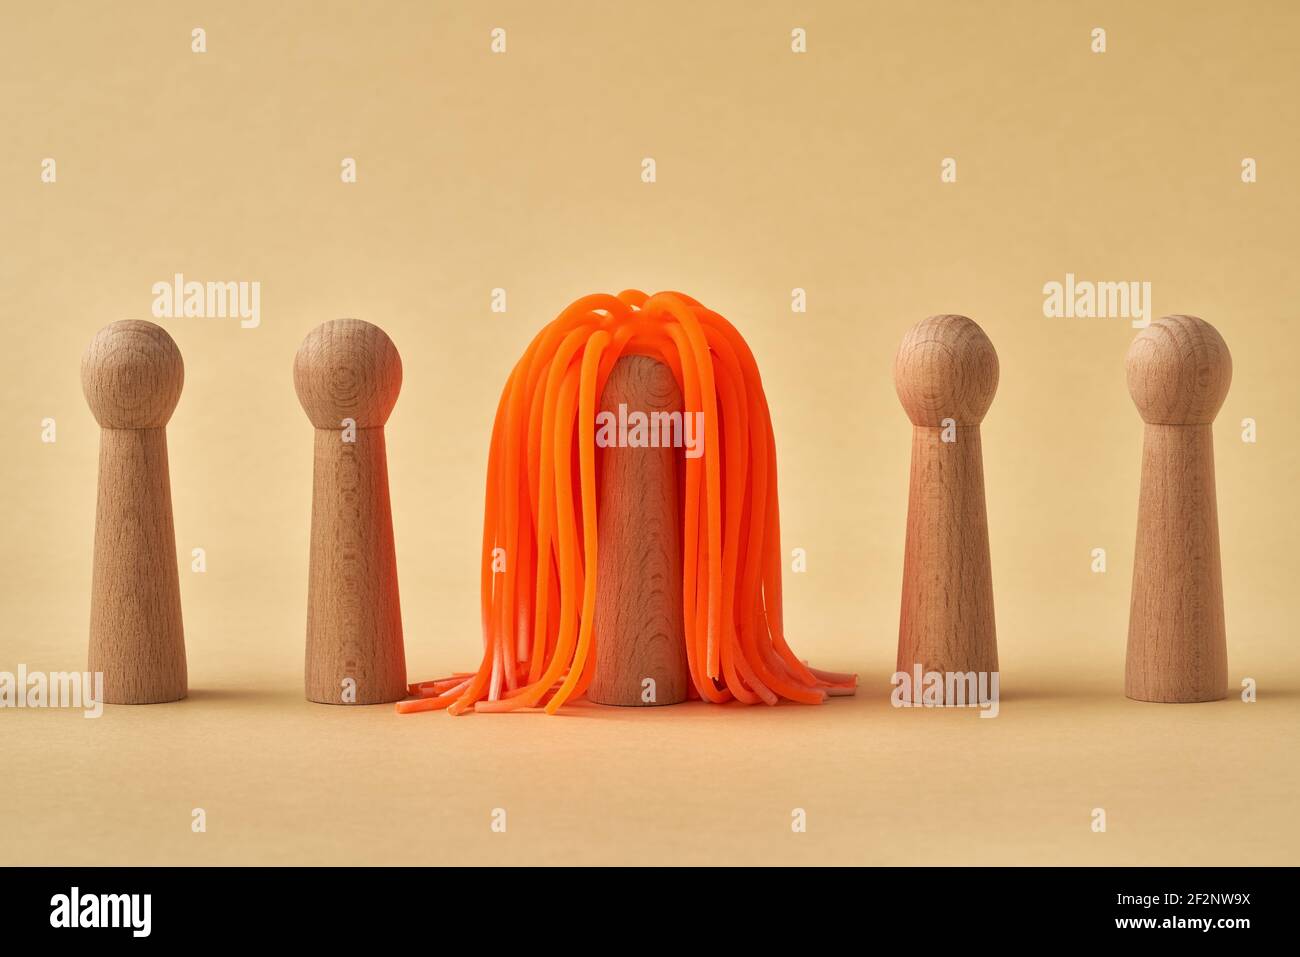 Wooden figures standing in a row, one with striking orange hair Stock Photo